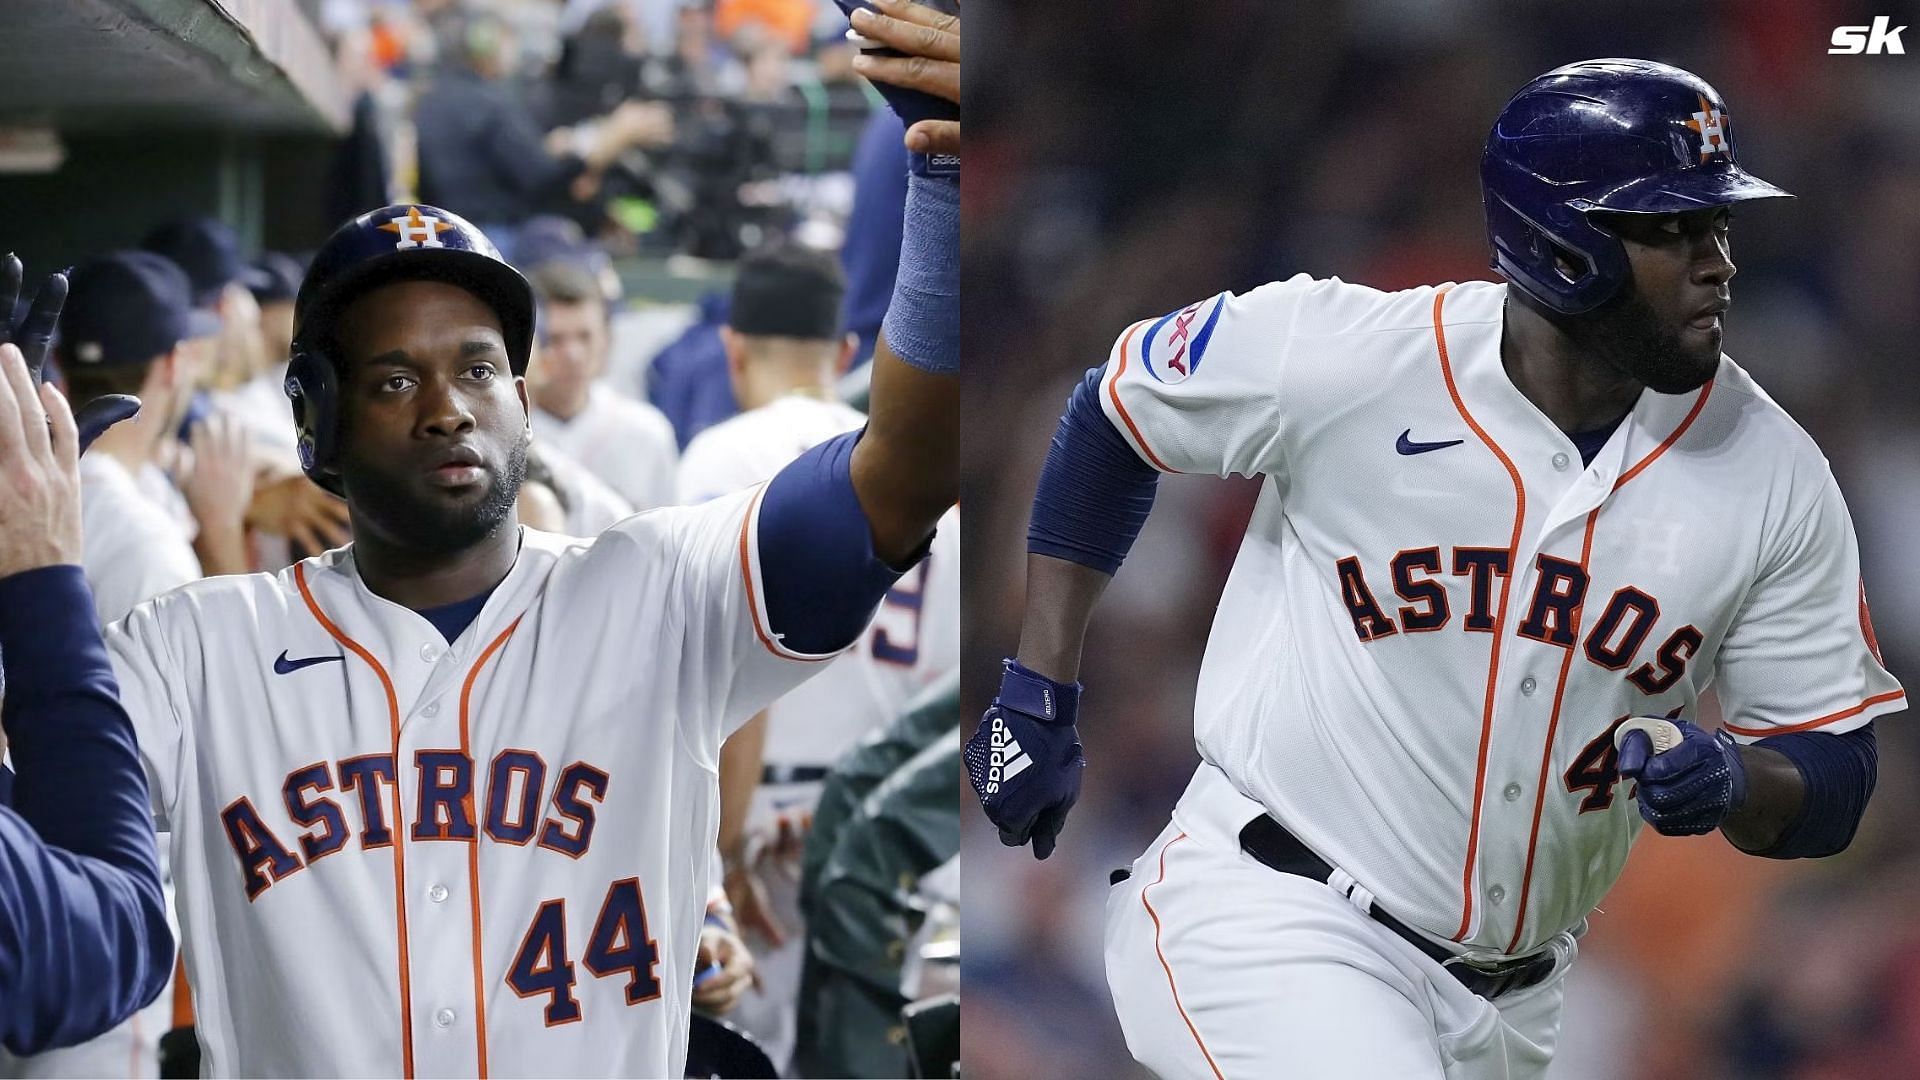 Astros Yordan Alvarez back on the field after being taken to